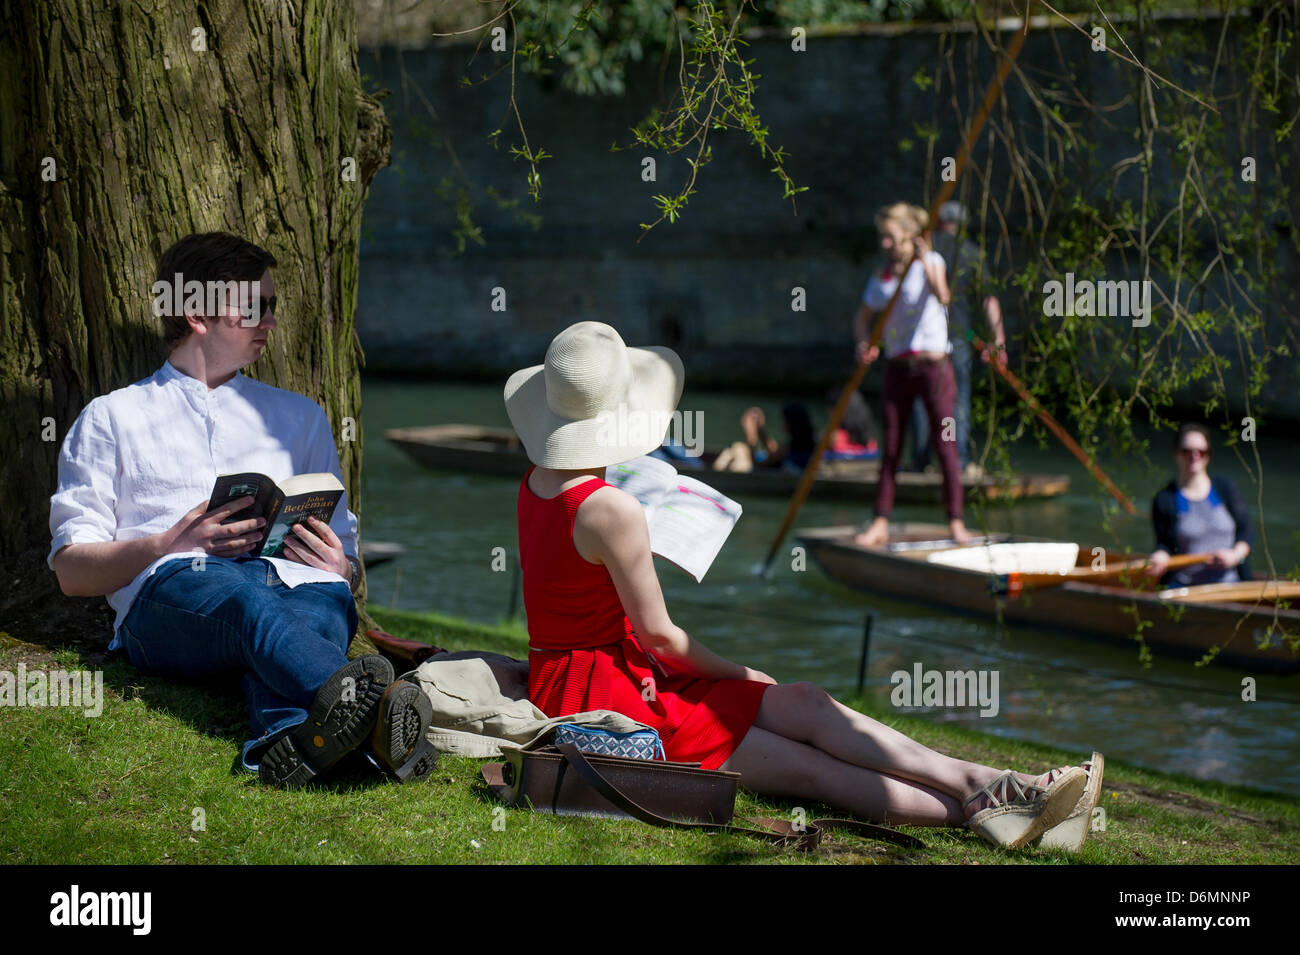 Cambridge, UK. 20th April, 2013. was bathed in sun today with people out on the river puntting and enjoying the good weather as spring seems to have arrived at last . Stock Photo